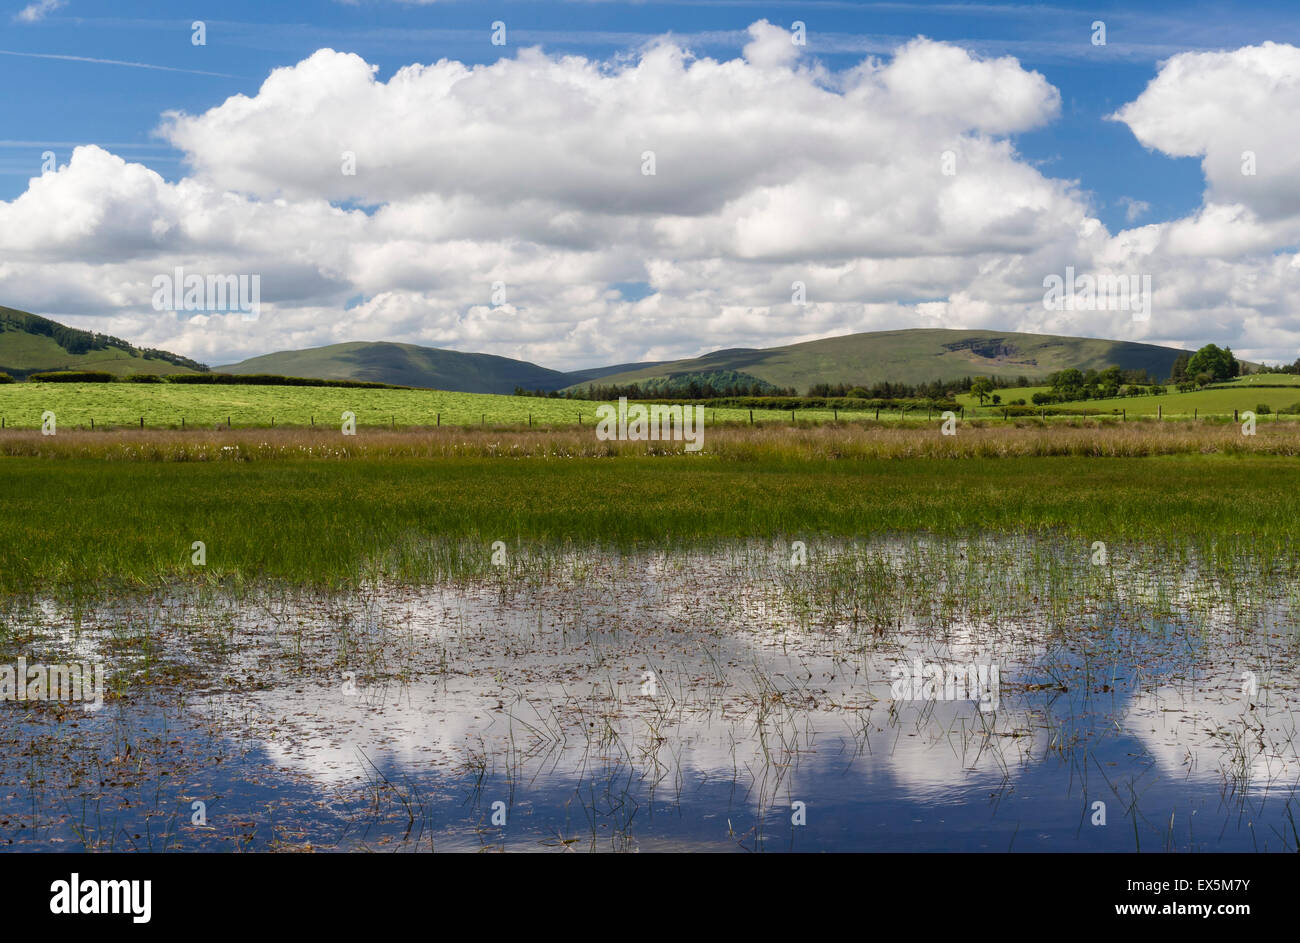 Landscape Reflections in water, Brecon Beacons National Park, Powys, Wales, UK Stock Photo